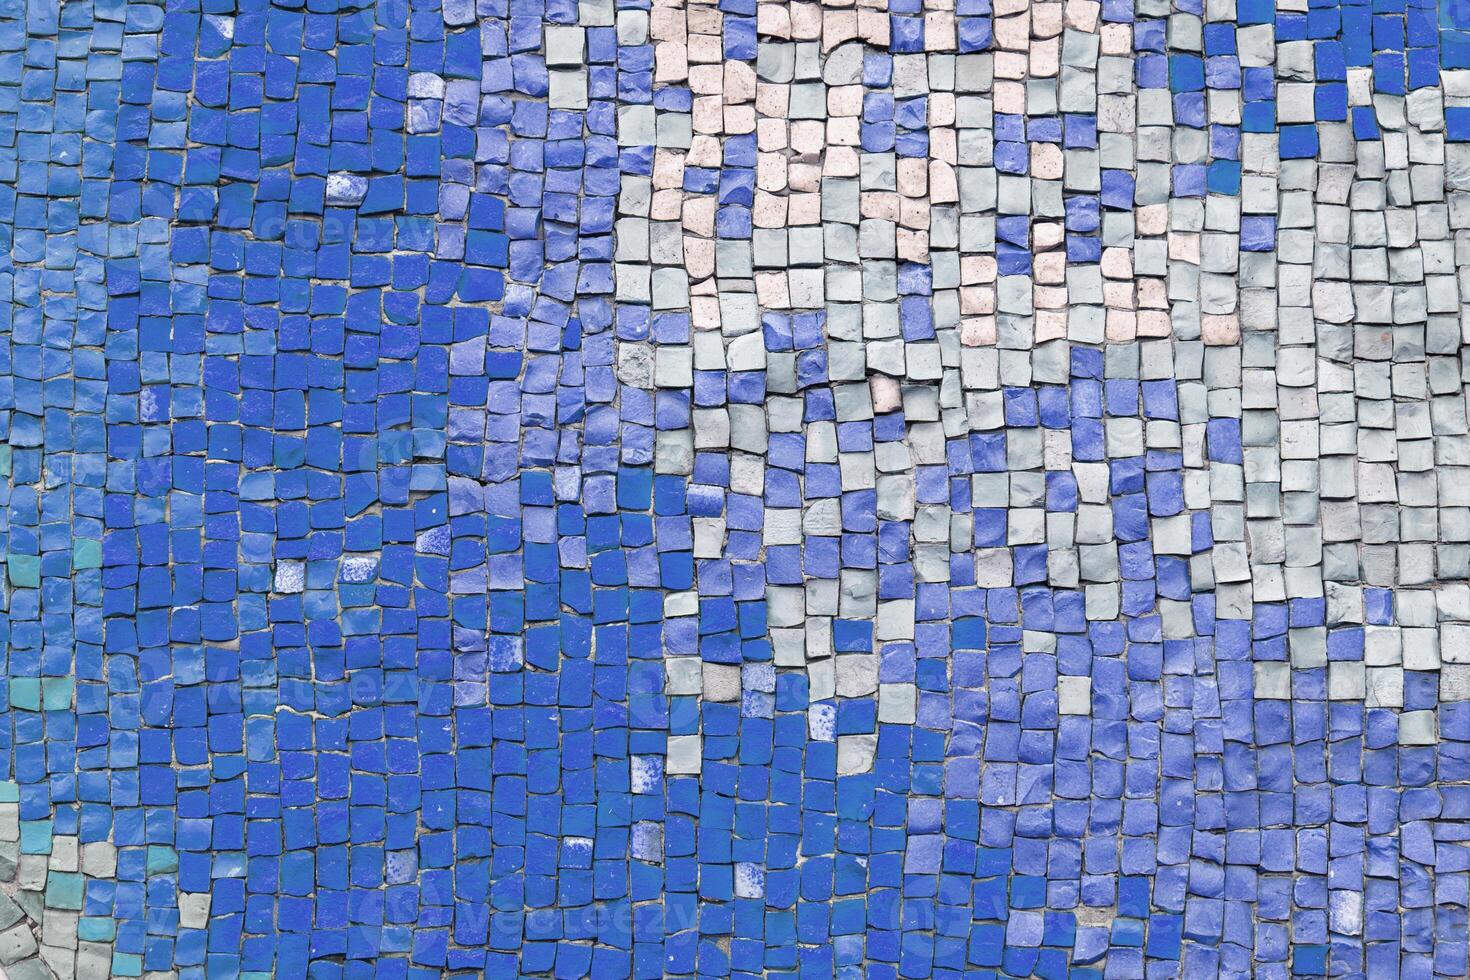 Abstract mosaic ceramic tile background, pattern of blue and white tiles, wall decor photo